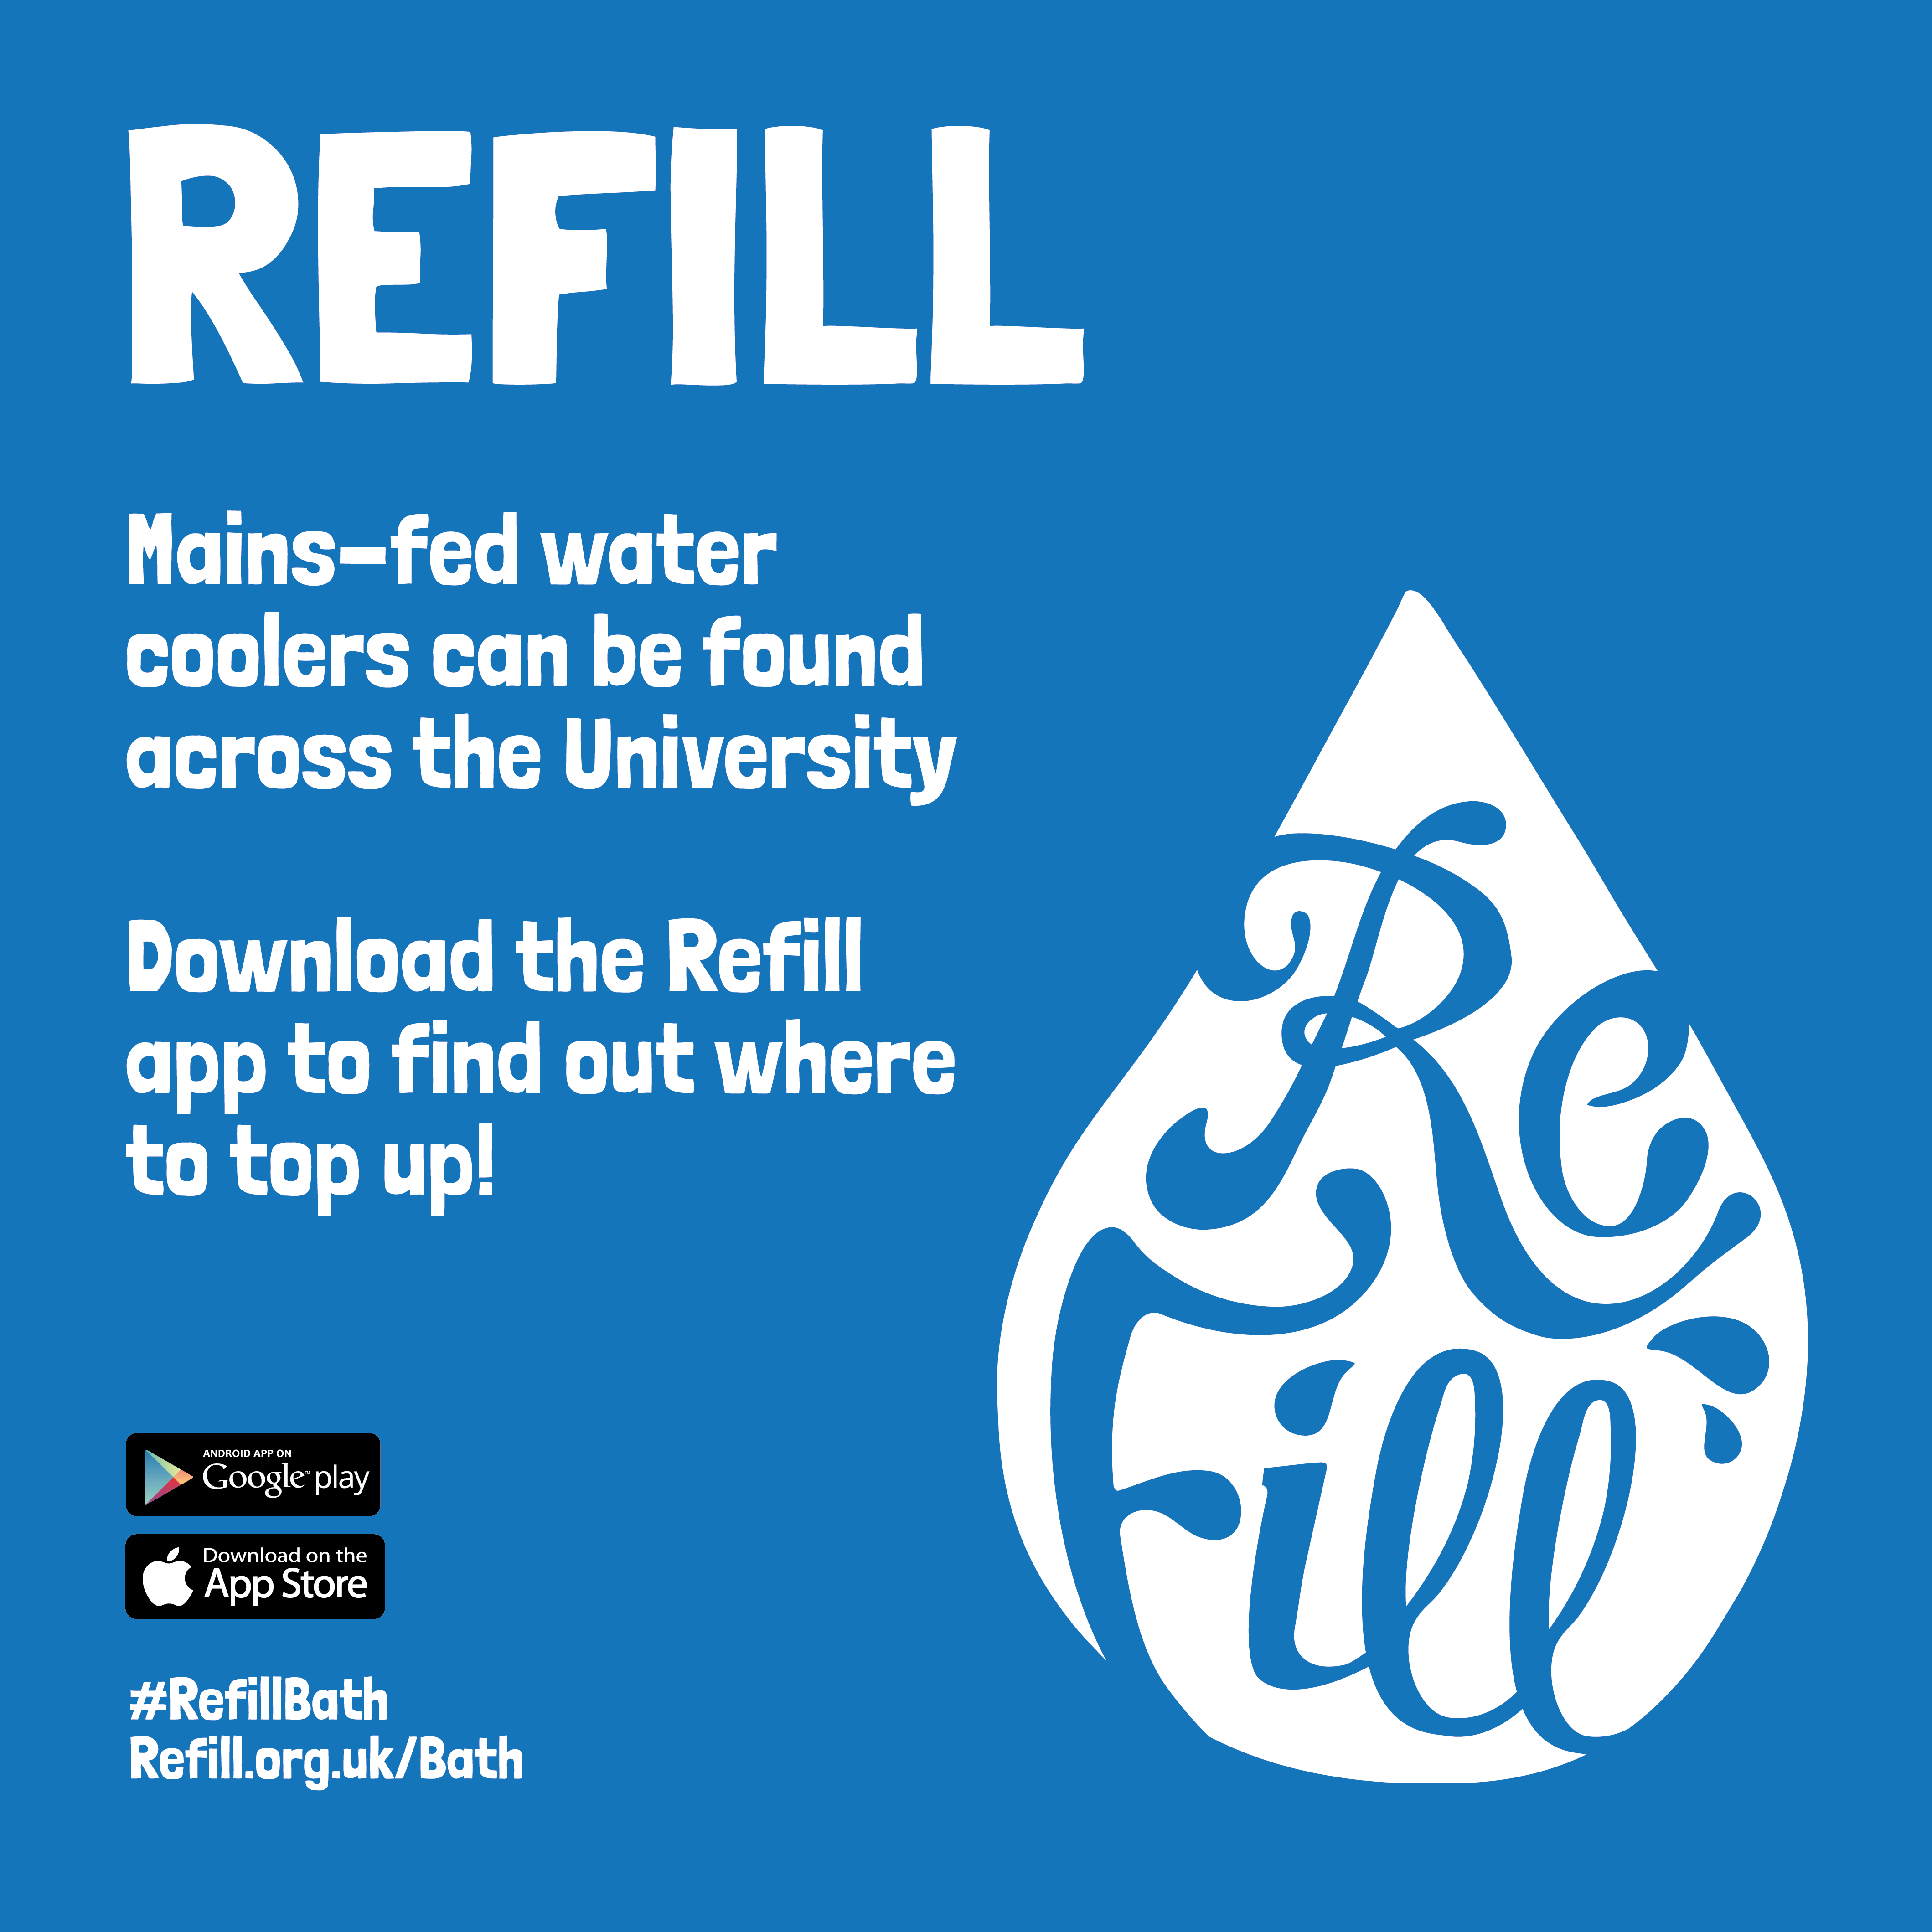 Refill: mains-fed water coolers can be found across the University. Download the refill app to find out where to top up!